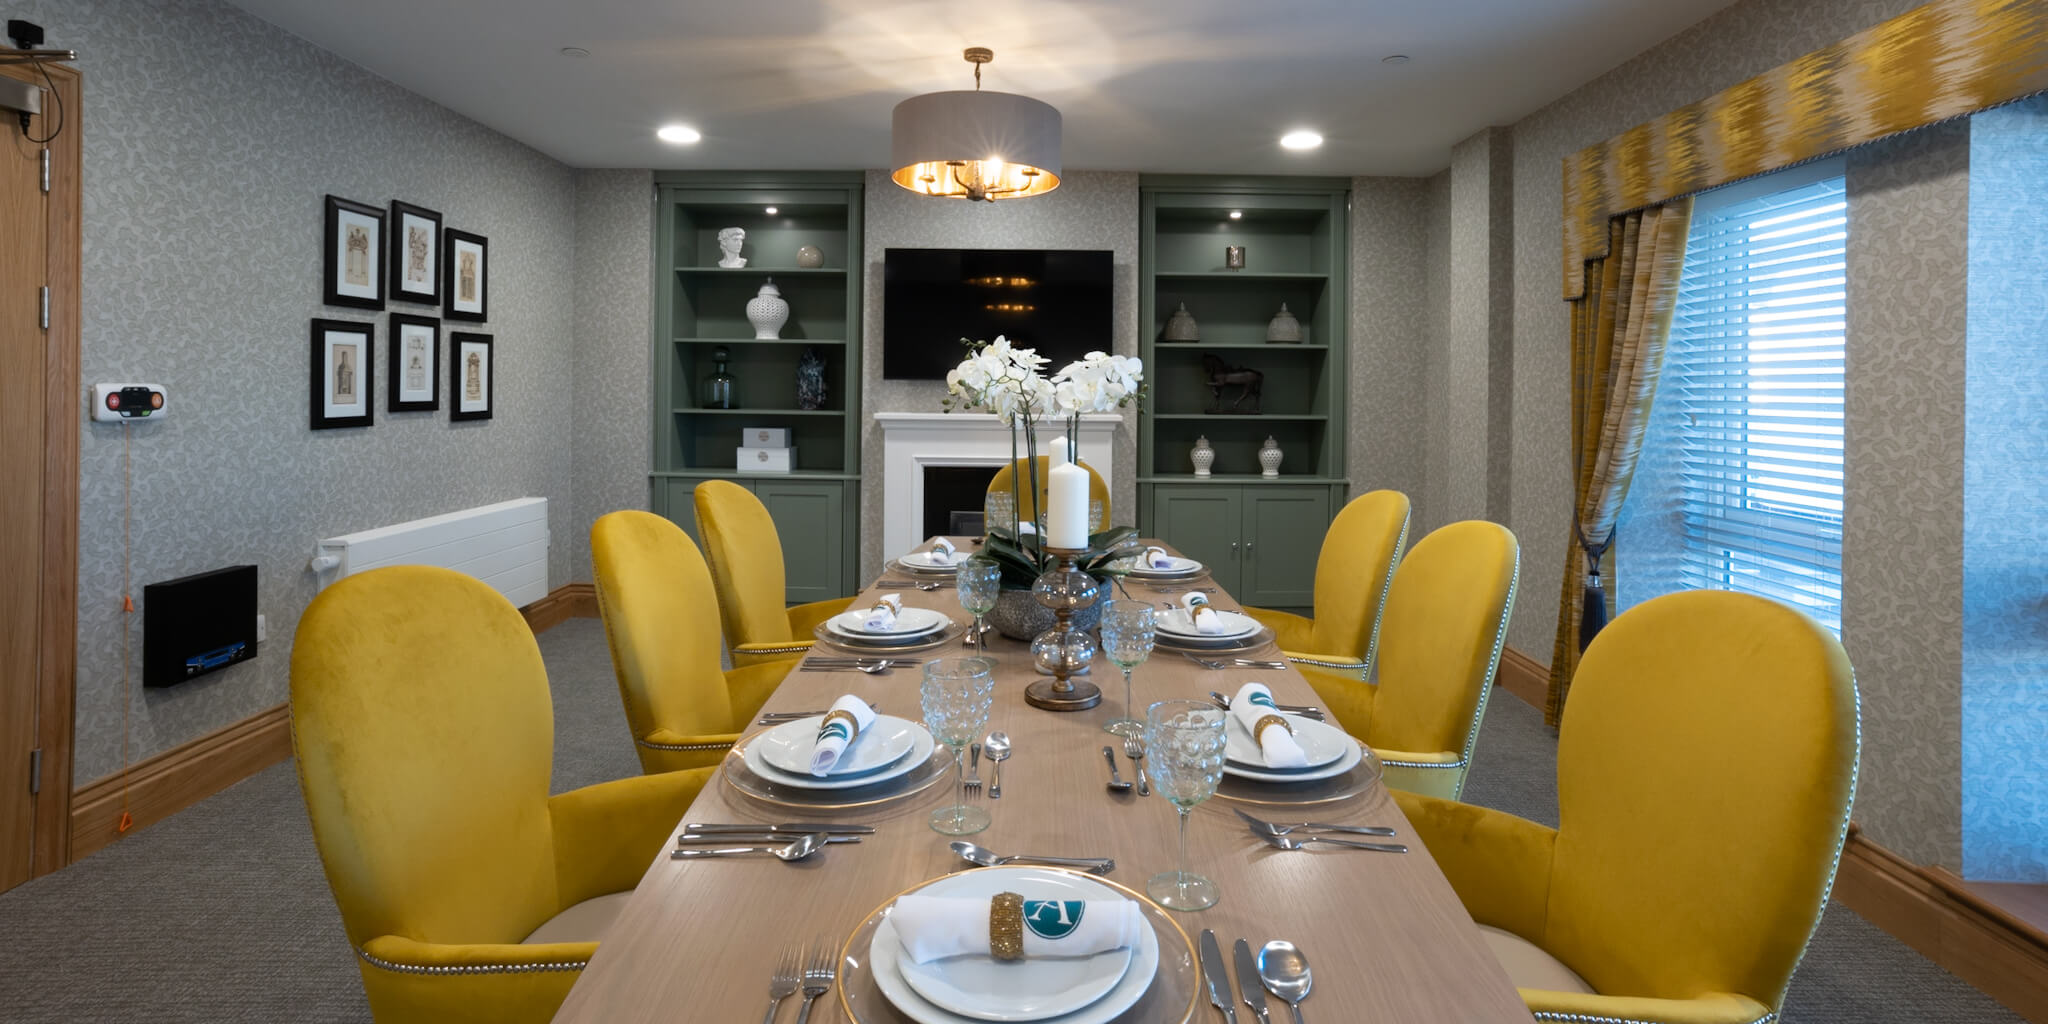 Private dining room. Dressed table with yellow dining chairs. Matching yellow curtains. Flat screen TV on wall with sage green bookcases on wither side. Six black framed photos on the wall.